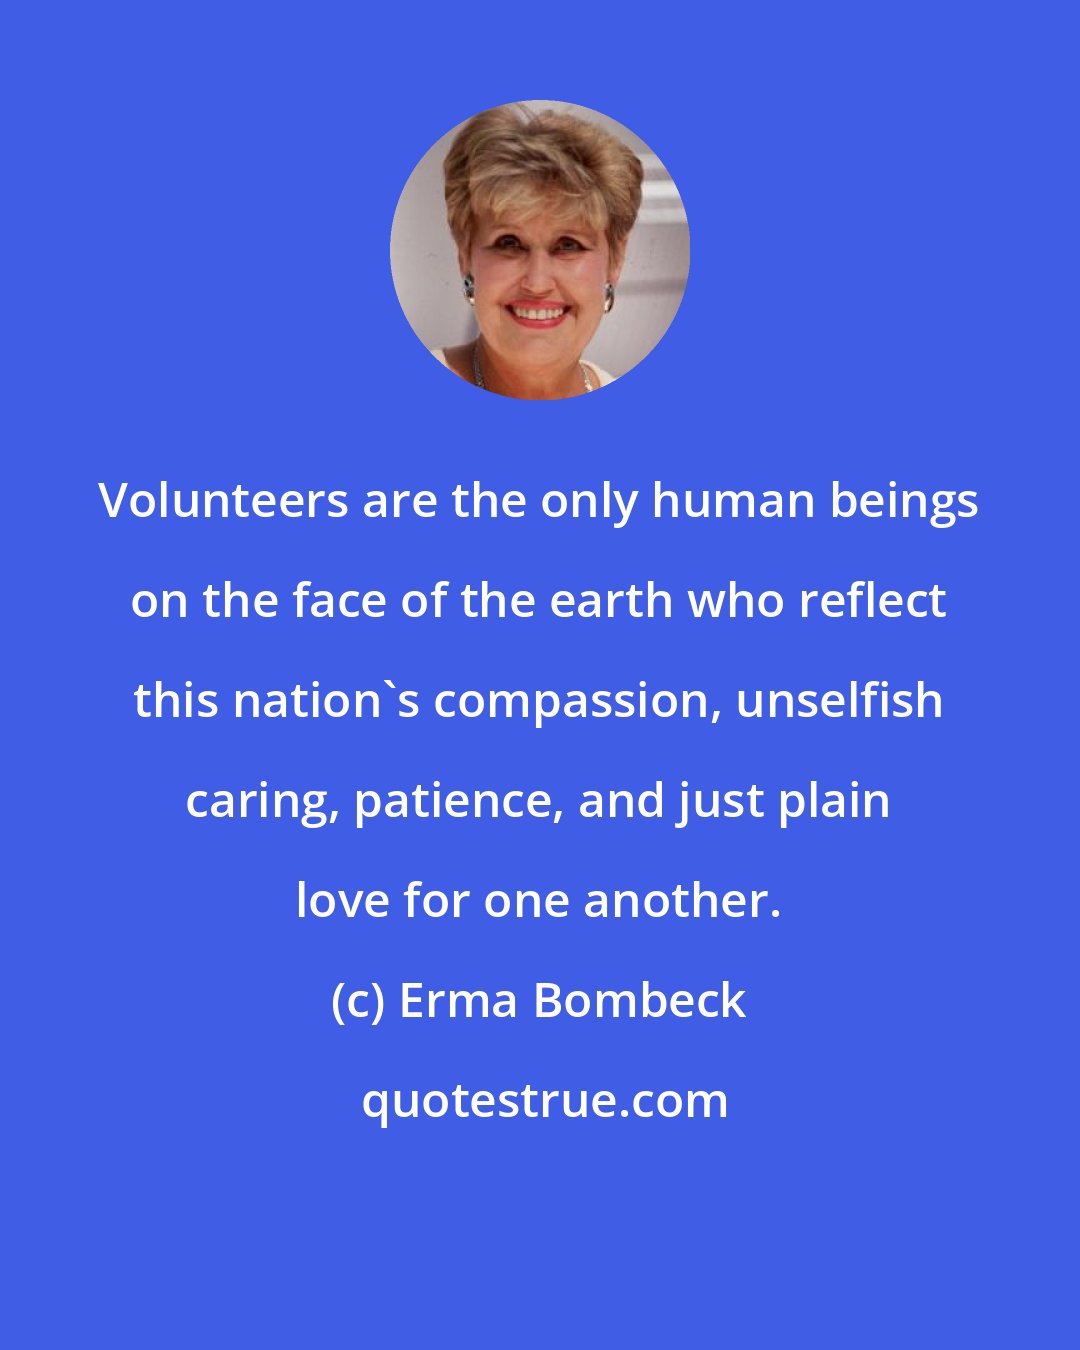 Erma Bombeck: Volunteers are the only human beings on the face of the earth who reflect this nation's compassion, unselfish caring, patience, and just plain love for one another.